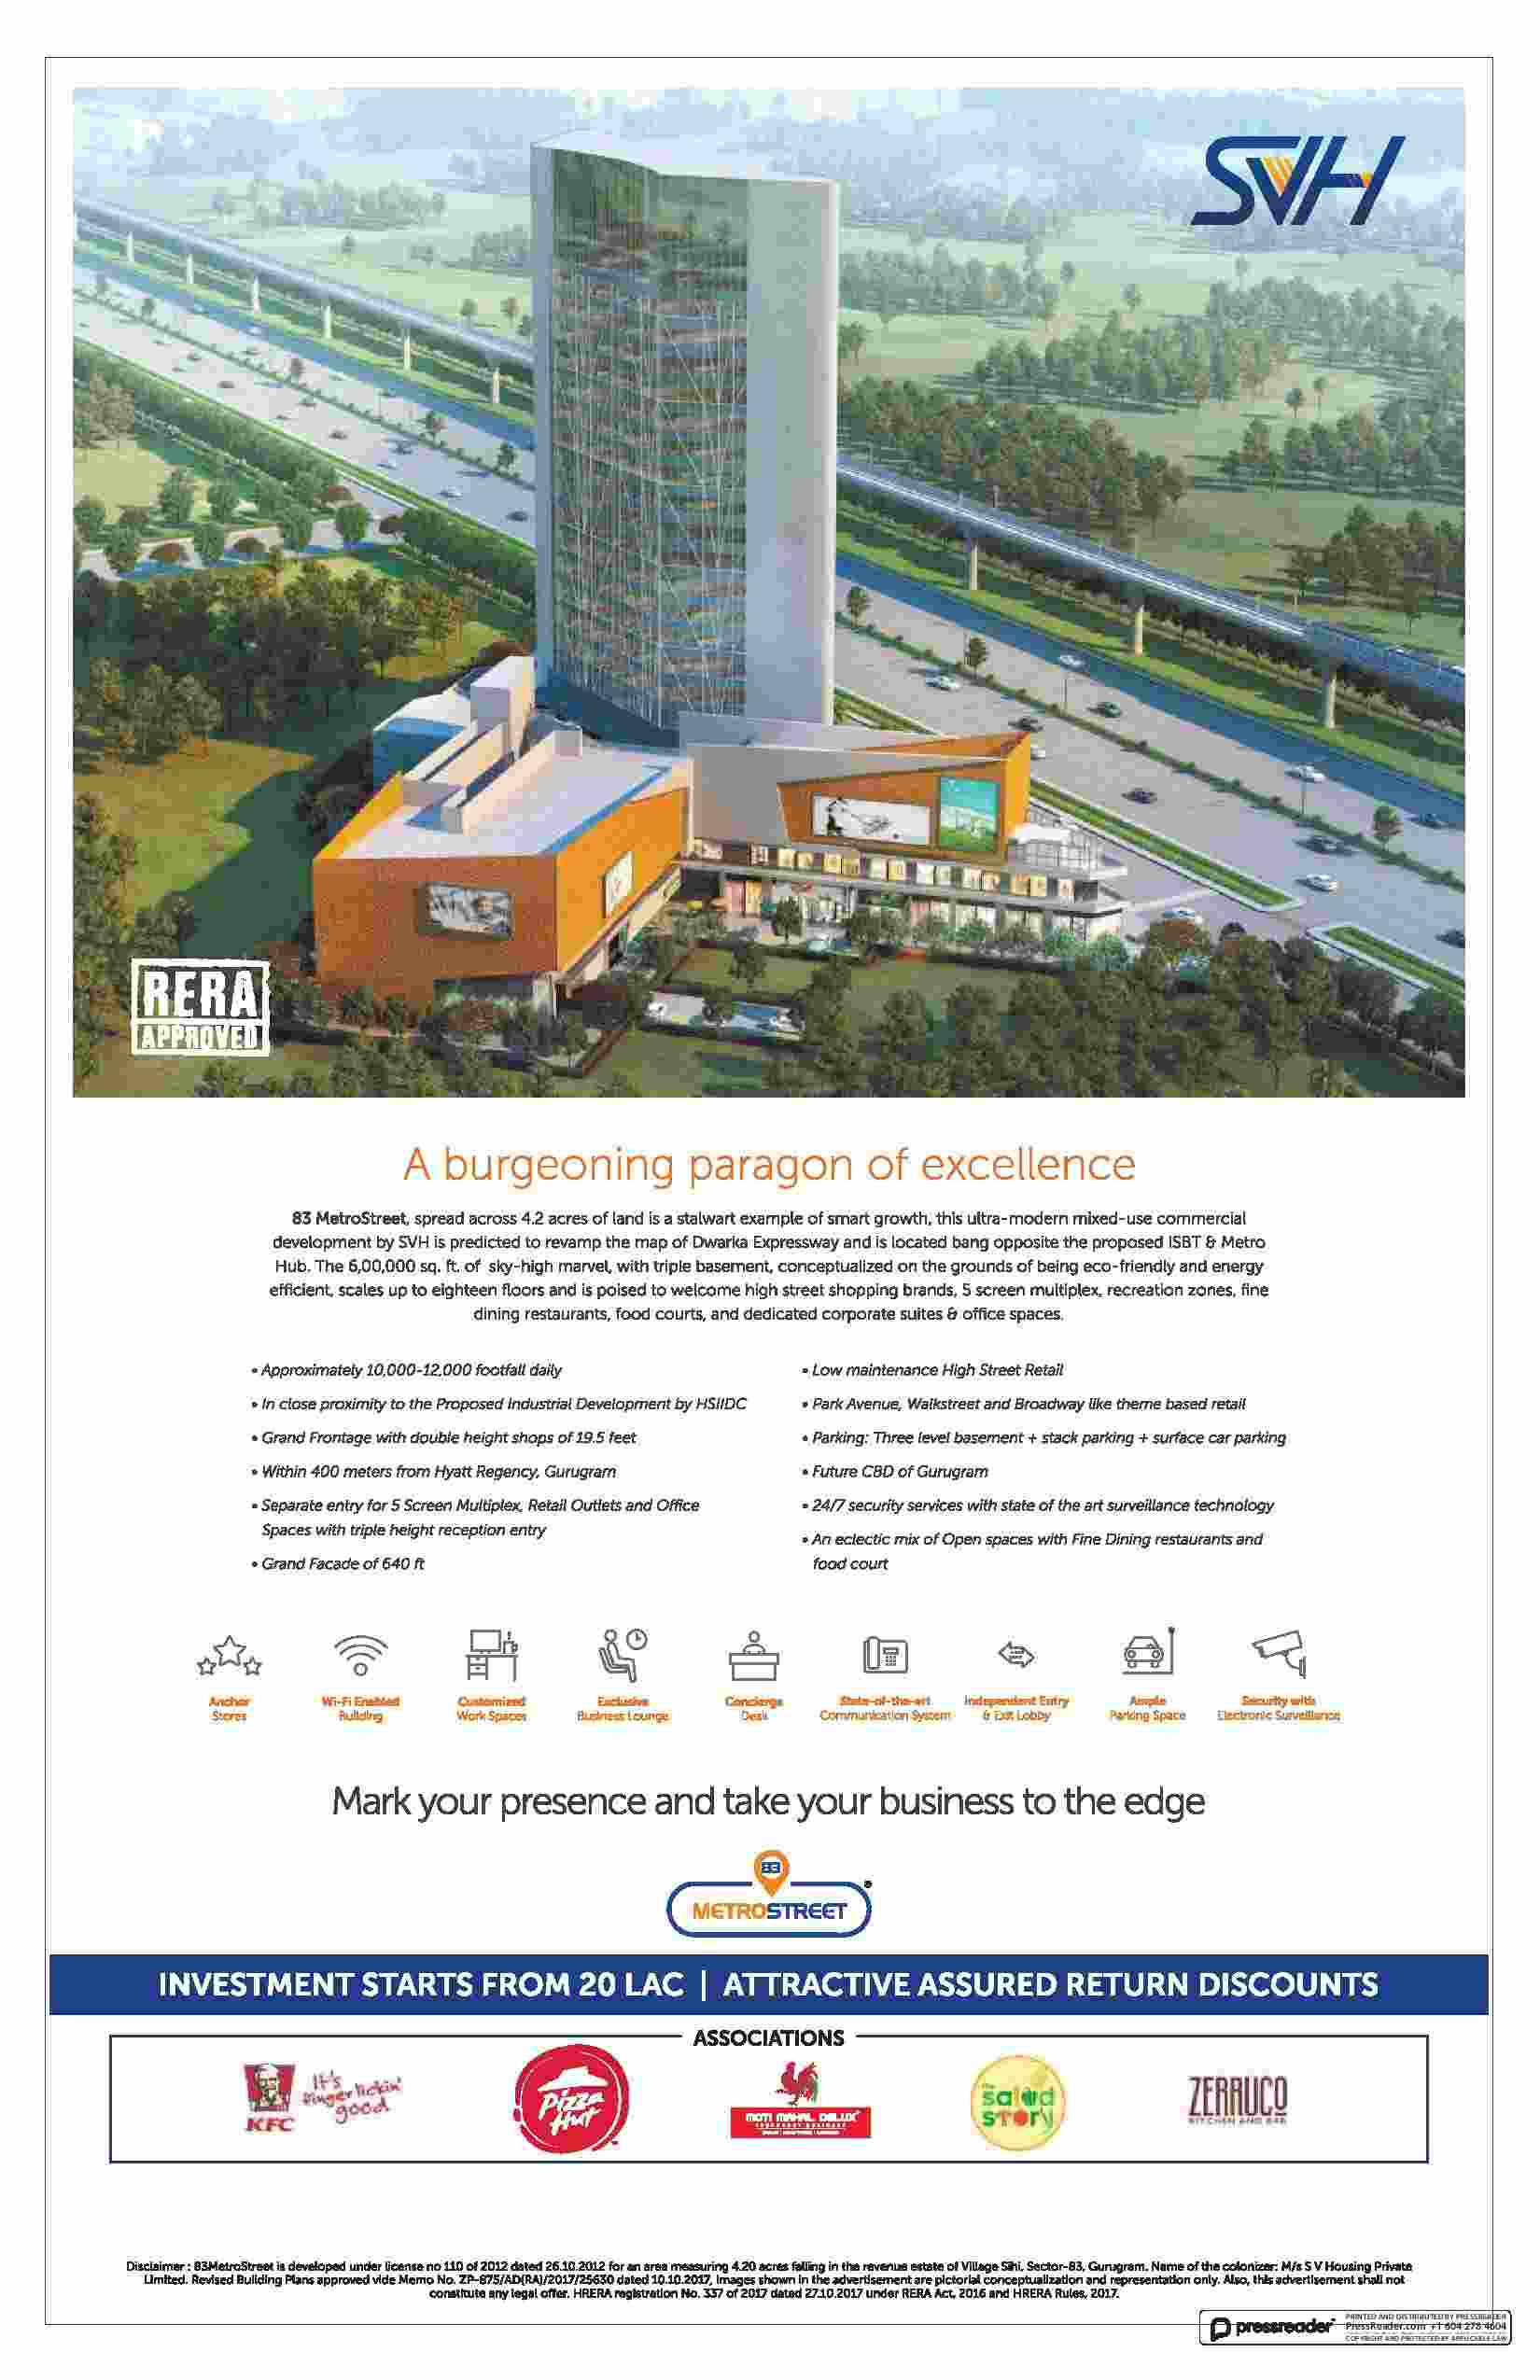 Make your presence & take your business to the edge at SVH 83 Metro Street in Gurgaon